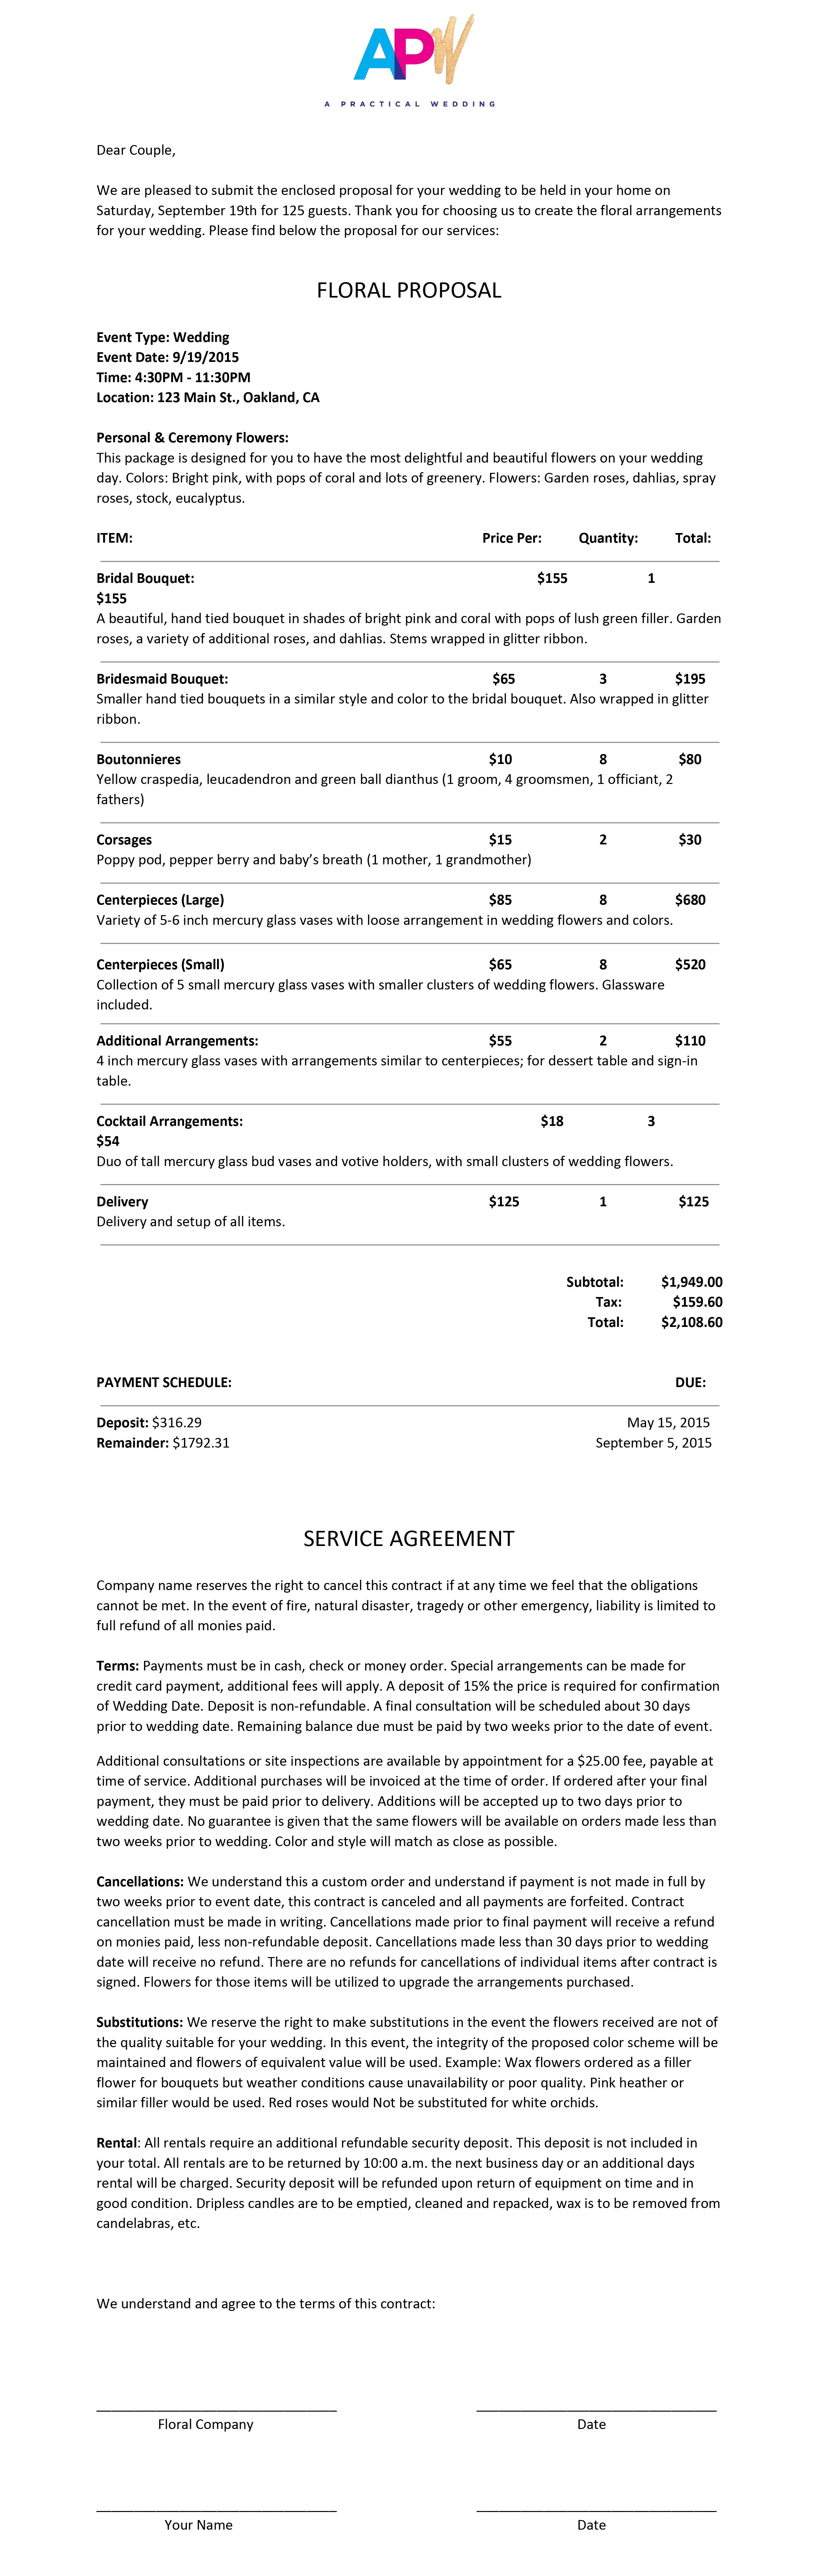 Wedding Florist Contract Template How to Hire A Wedding Florist